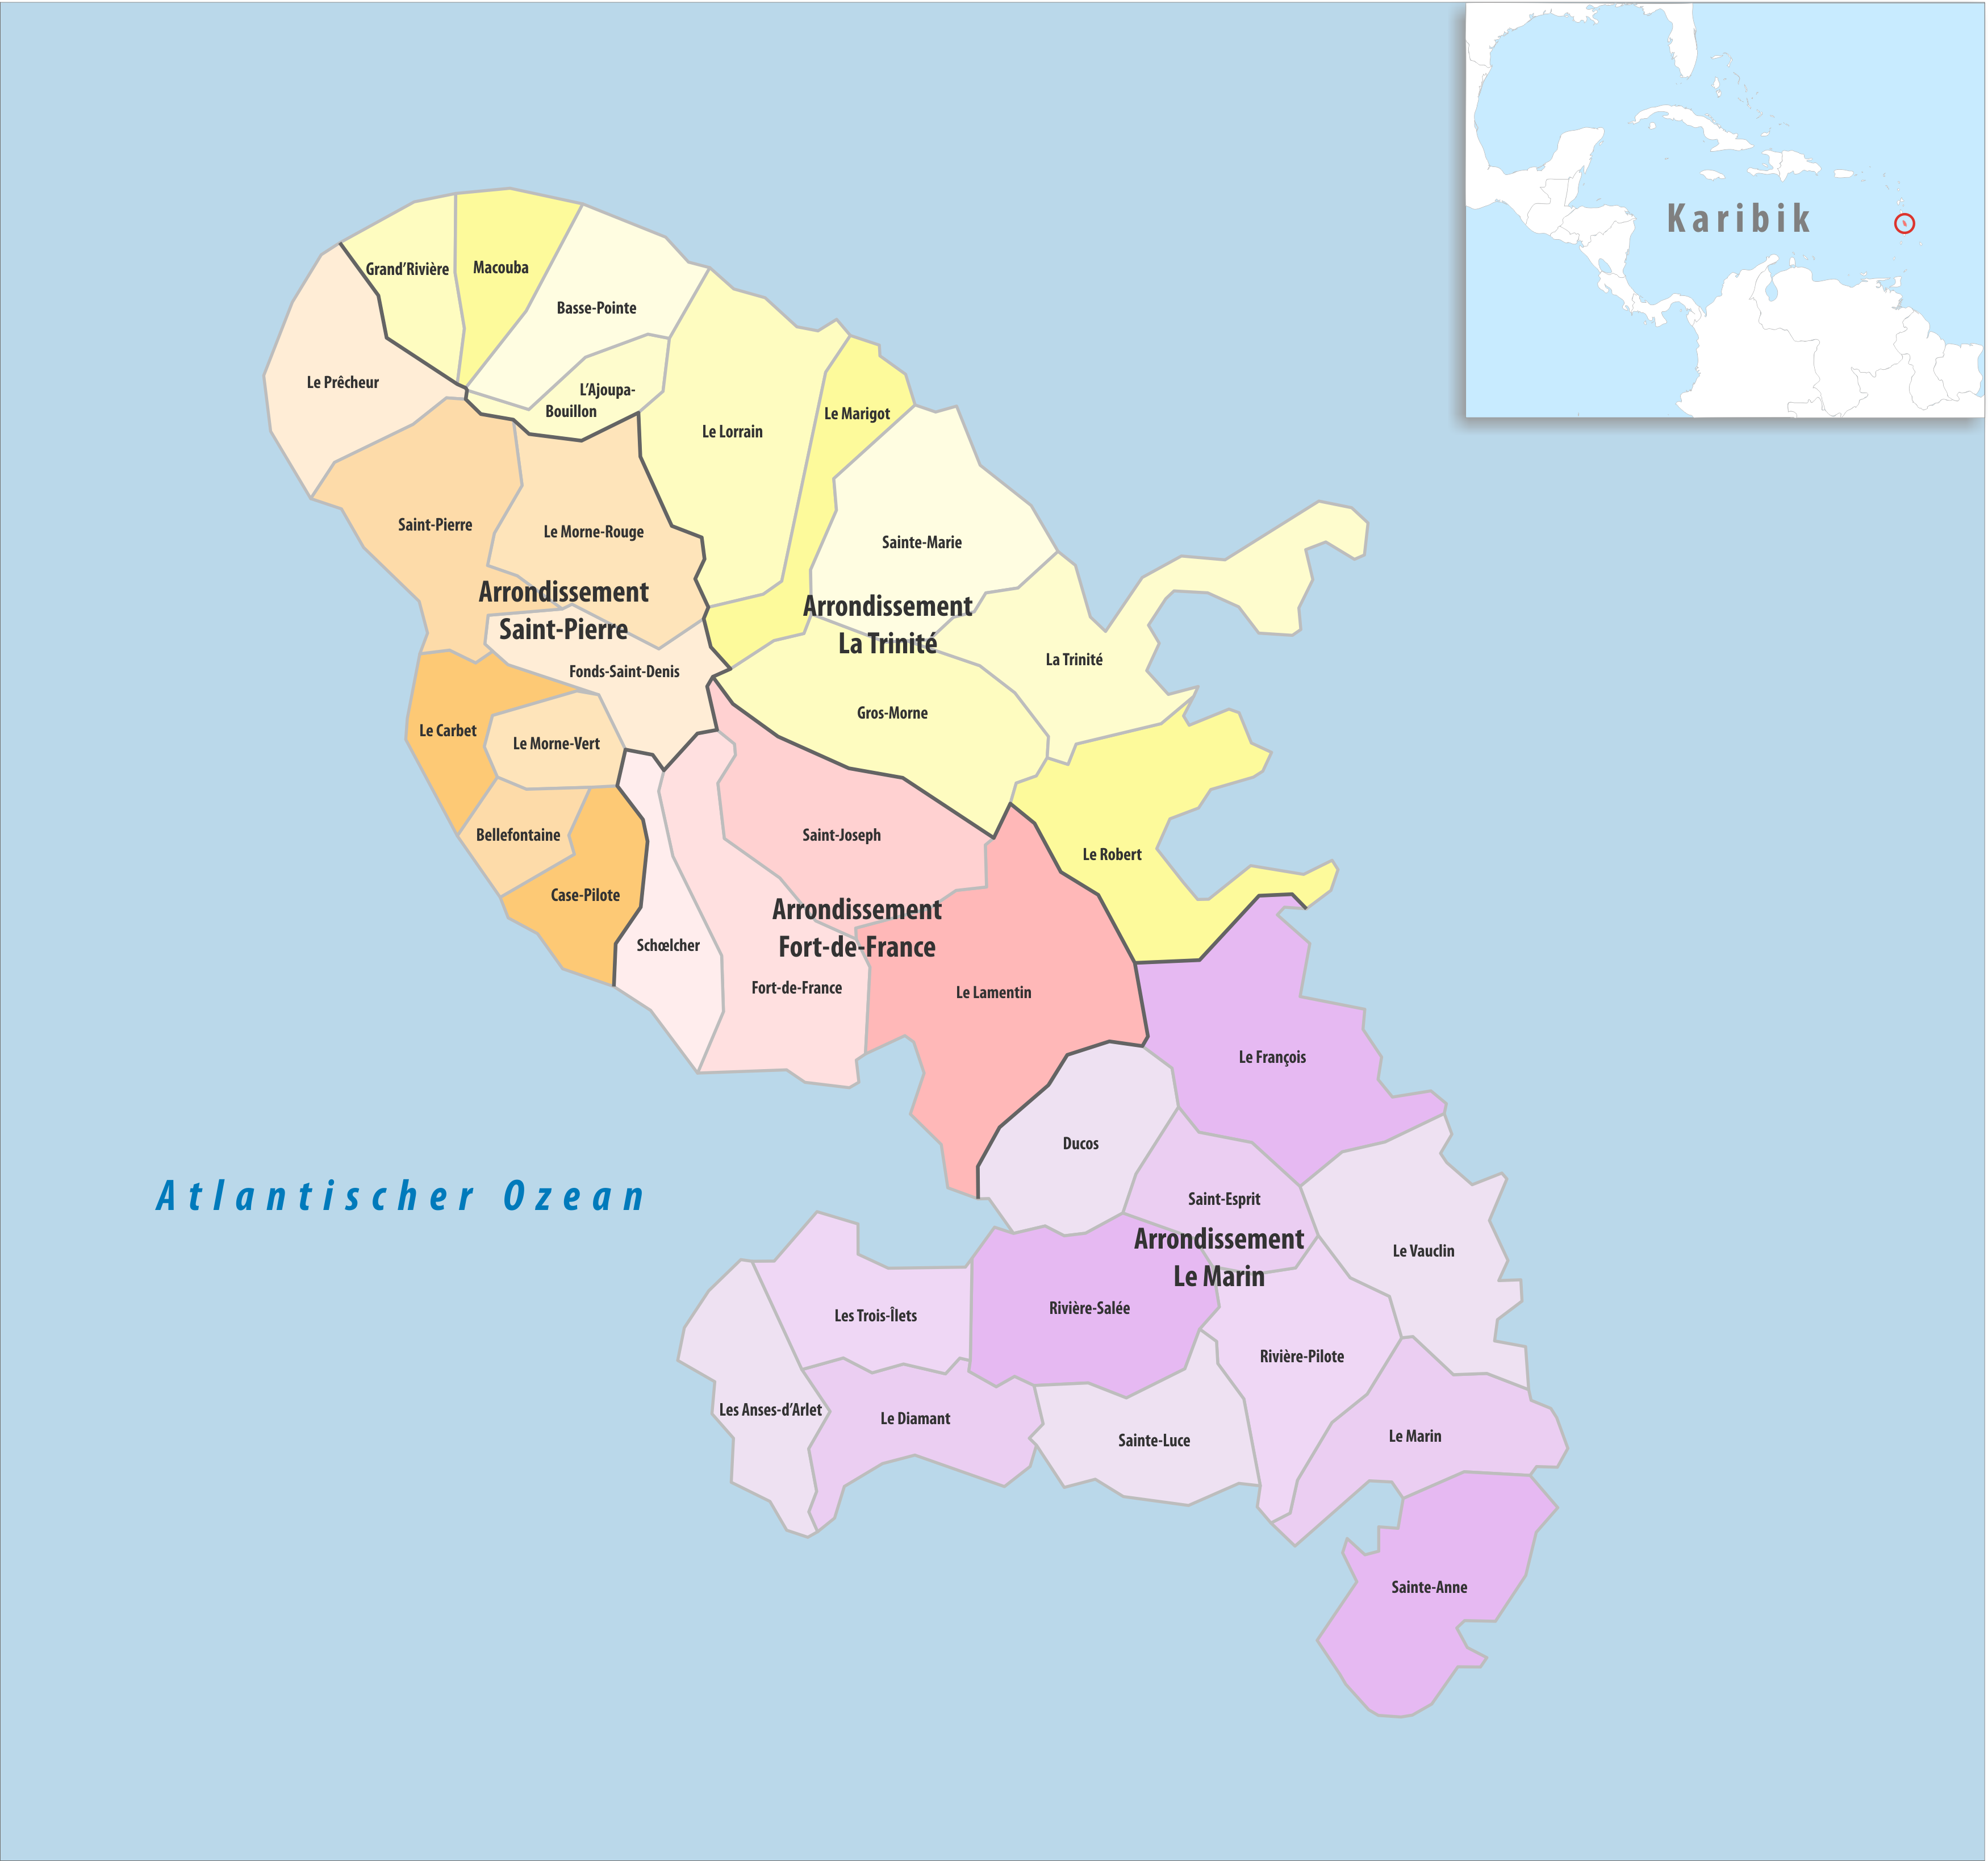 A color-coated map of Martinique